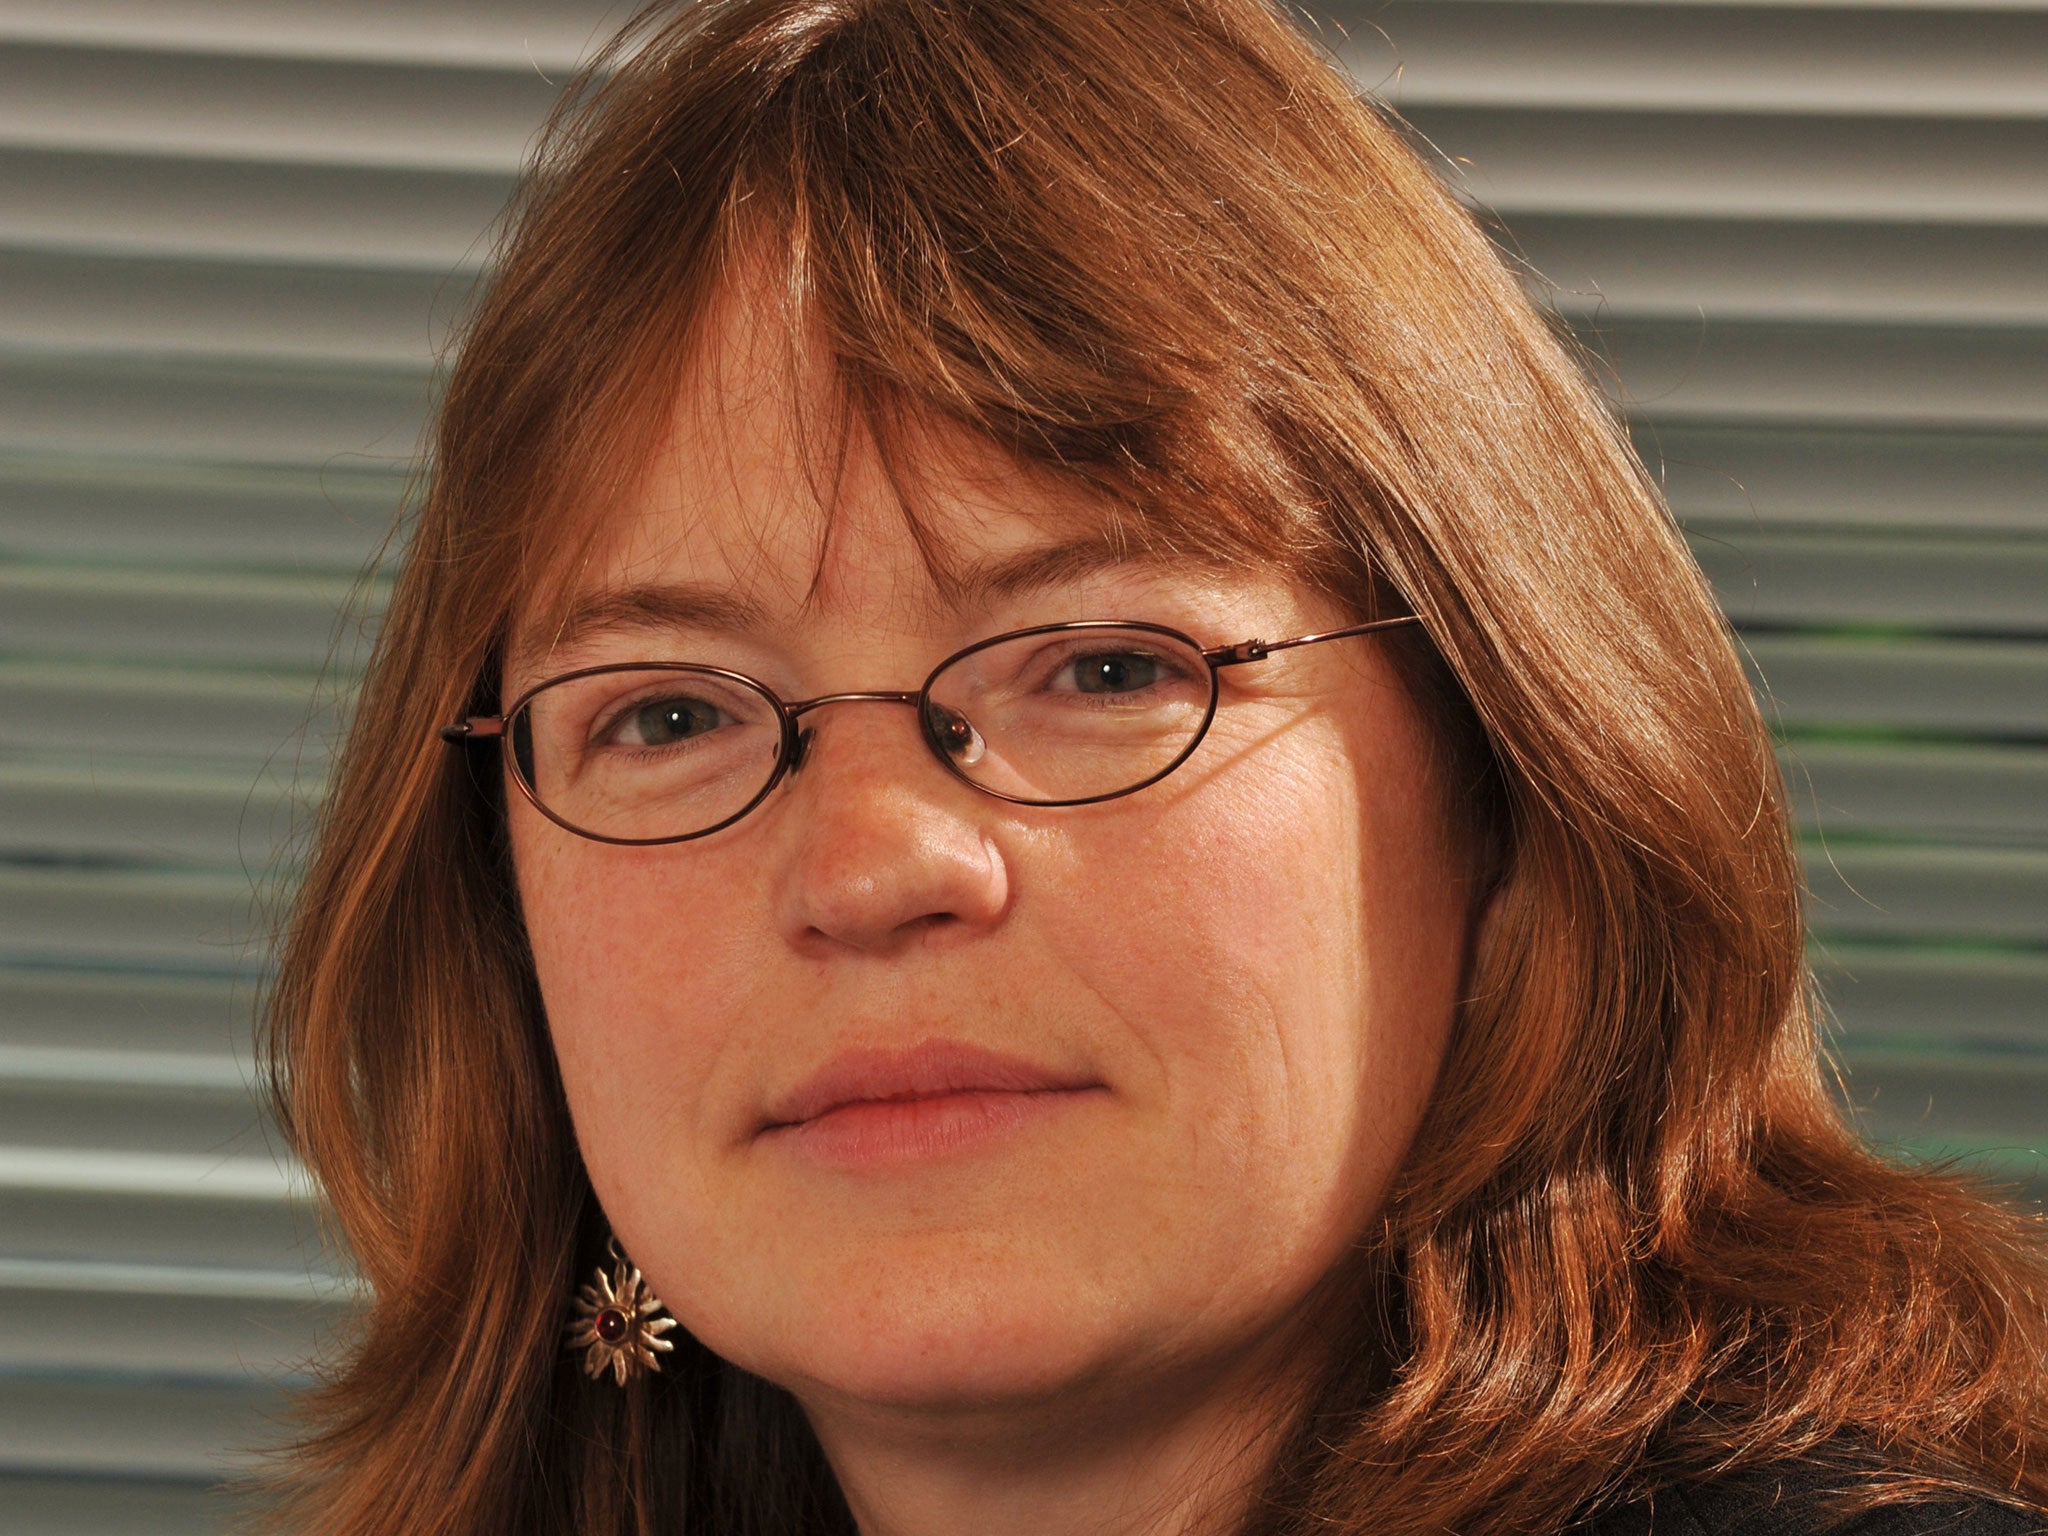 Interim head of the Financial Conduct Authority (FCA), Tracey McDermott